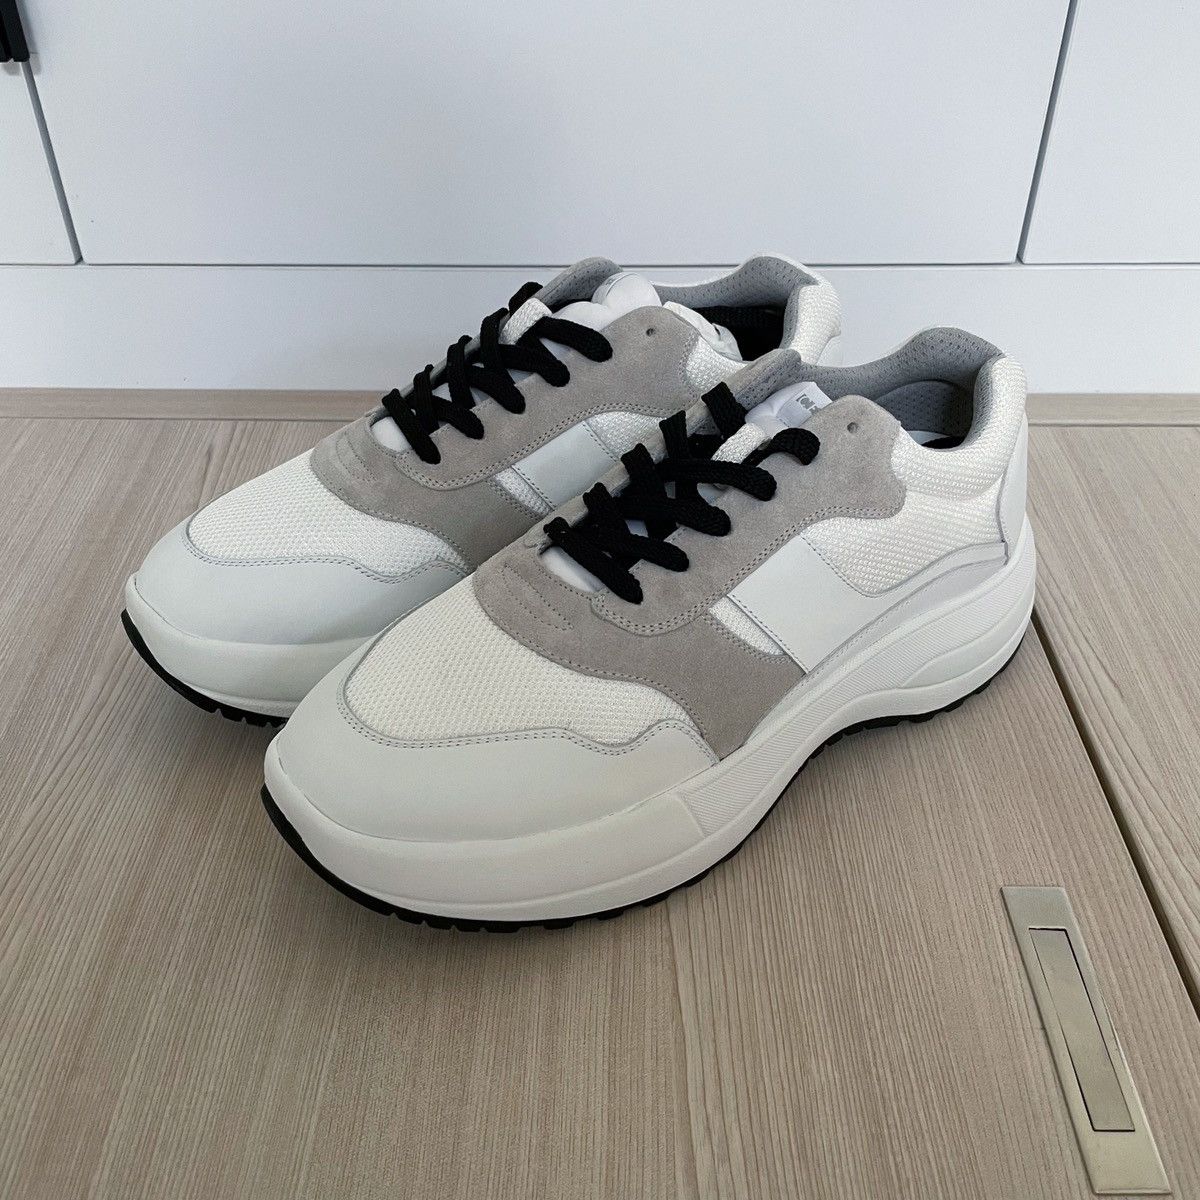 Céline by Phoebe Philo SS 2018 Delivery Sneakers · INTO